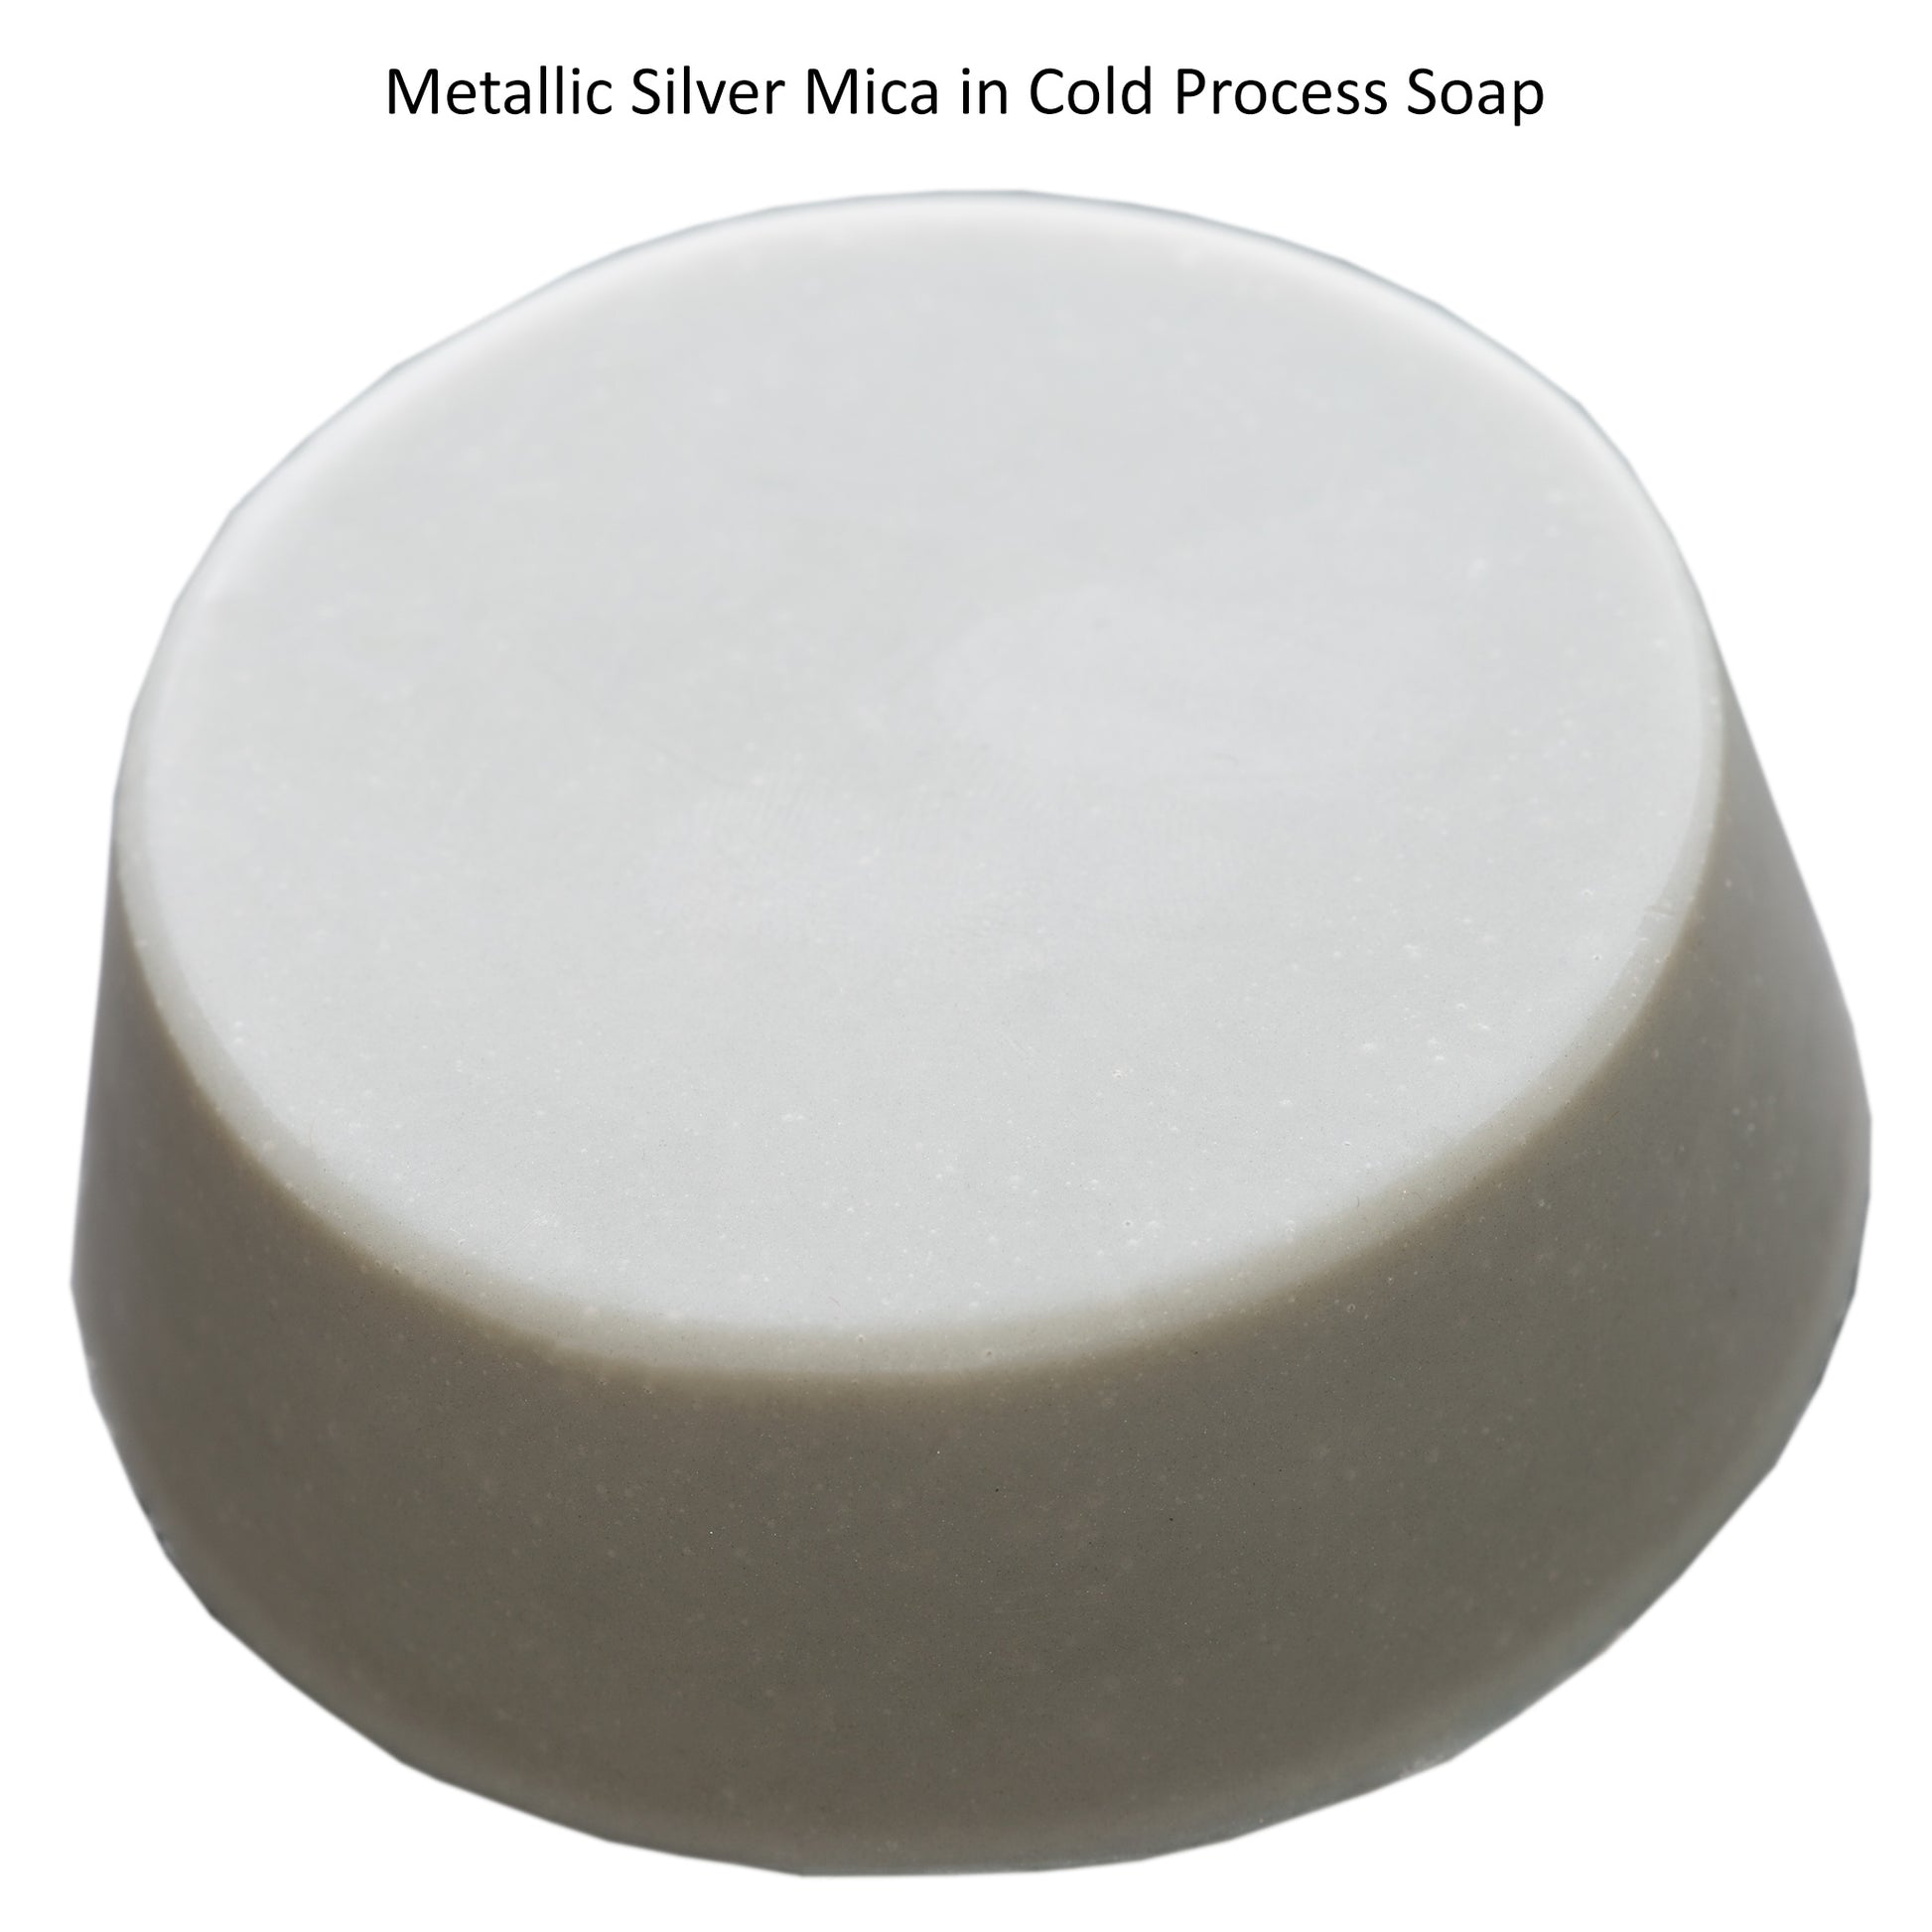 White Mica - Pearly Finish – Voyageur Soap & Candle